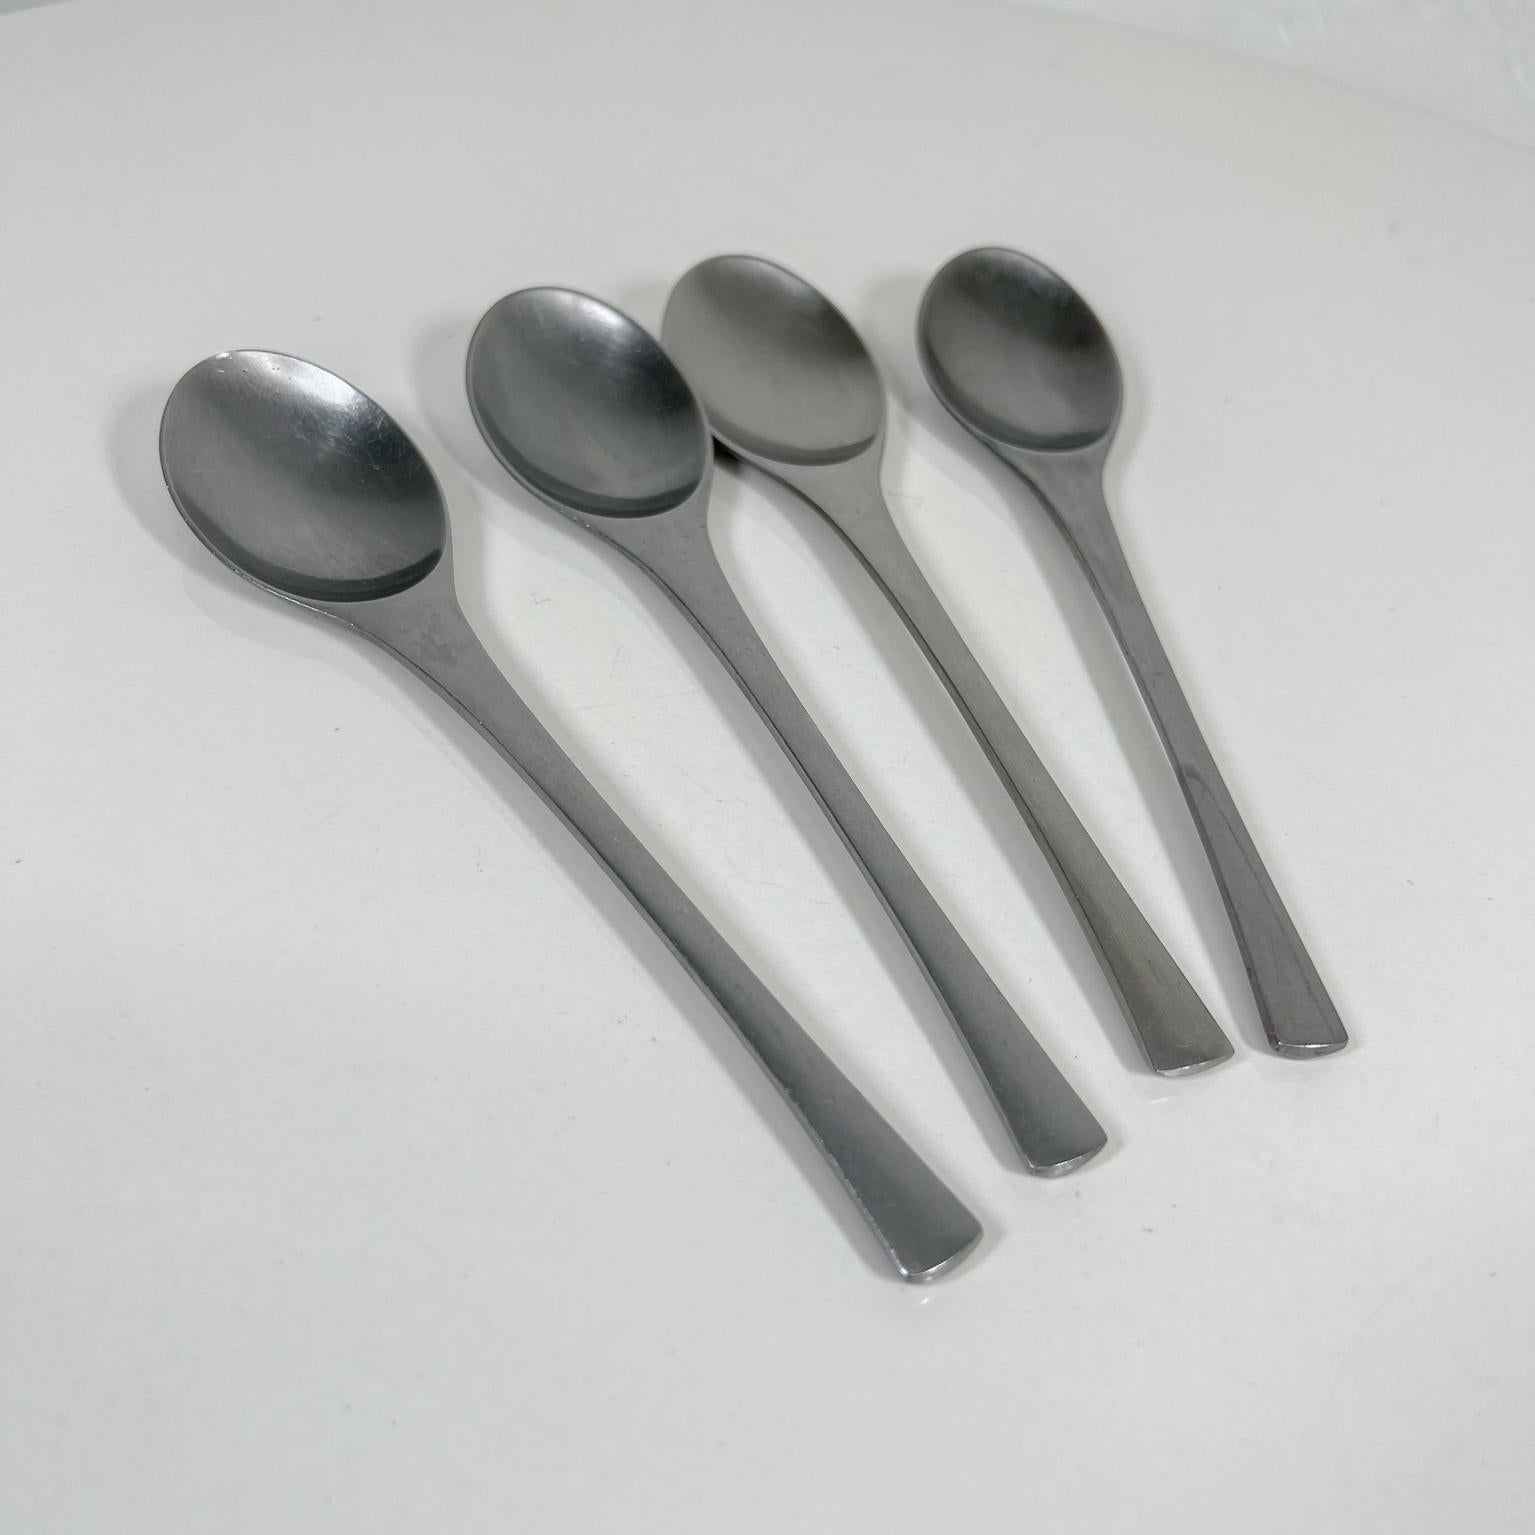 1950s Vintage Danish Modern Dansk IHQ Set of Four Spoons Odin Germany
Designed by Jens Quistgaard Maker stamped
Stainless Steel
7.88 x 1.75 w
Preowned with wear and use present
Original unrestored vintage condition.
See all images provided